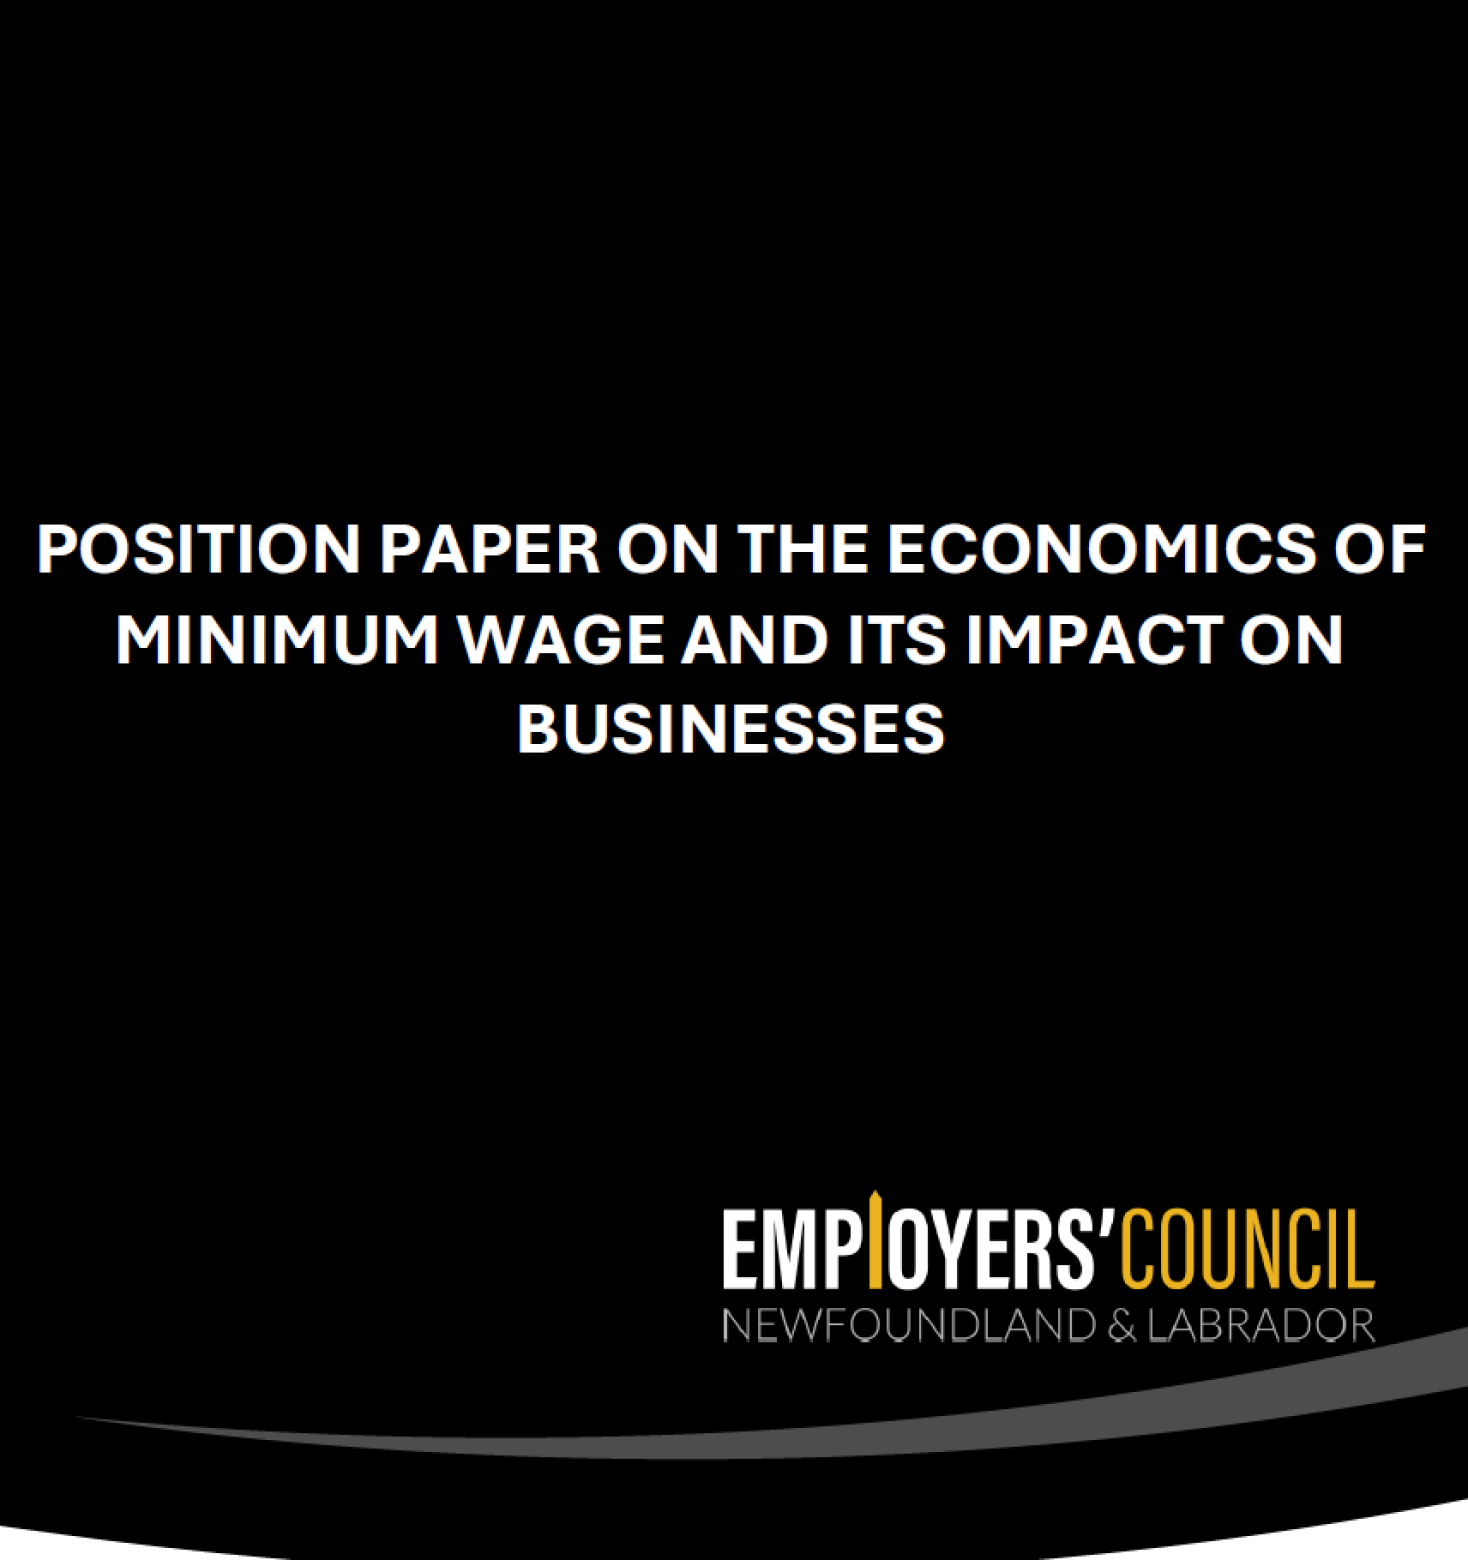 Submission to Government on Minimum Wage and its Impact on Businesses